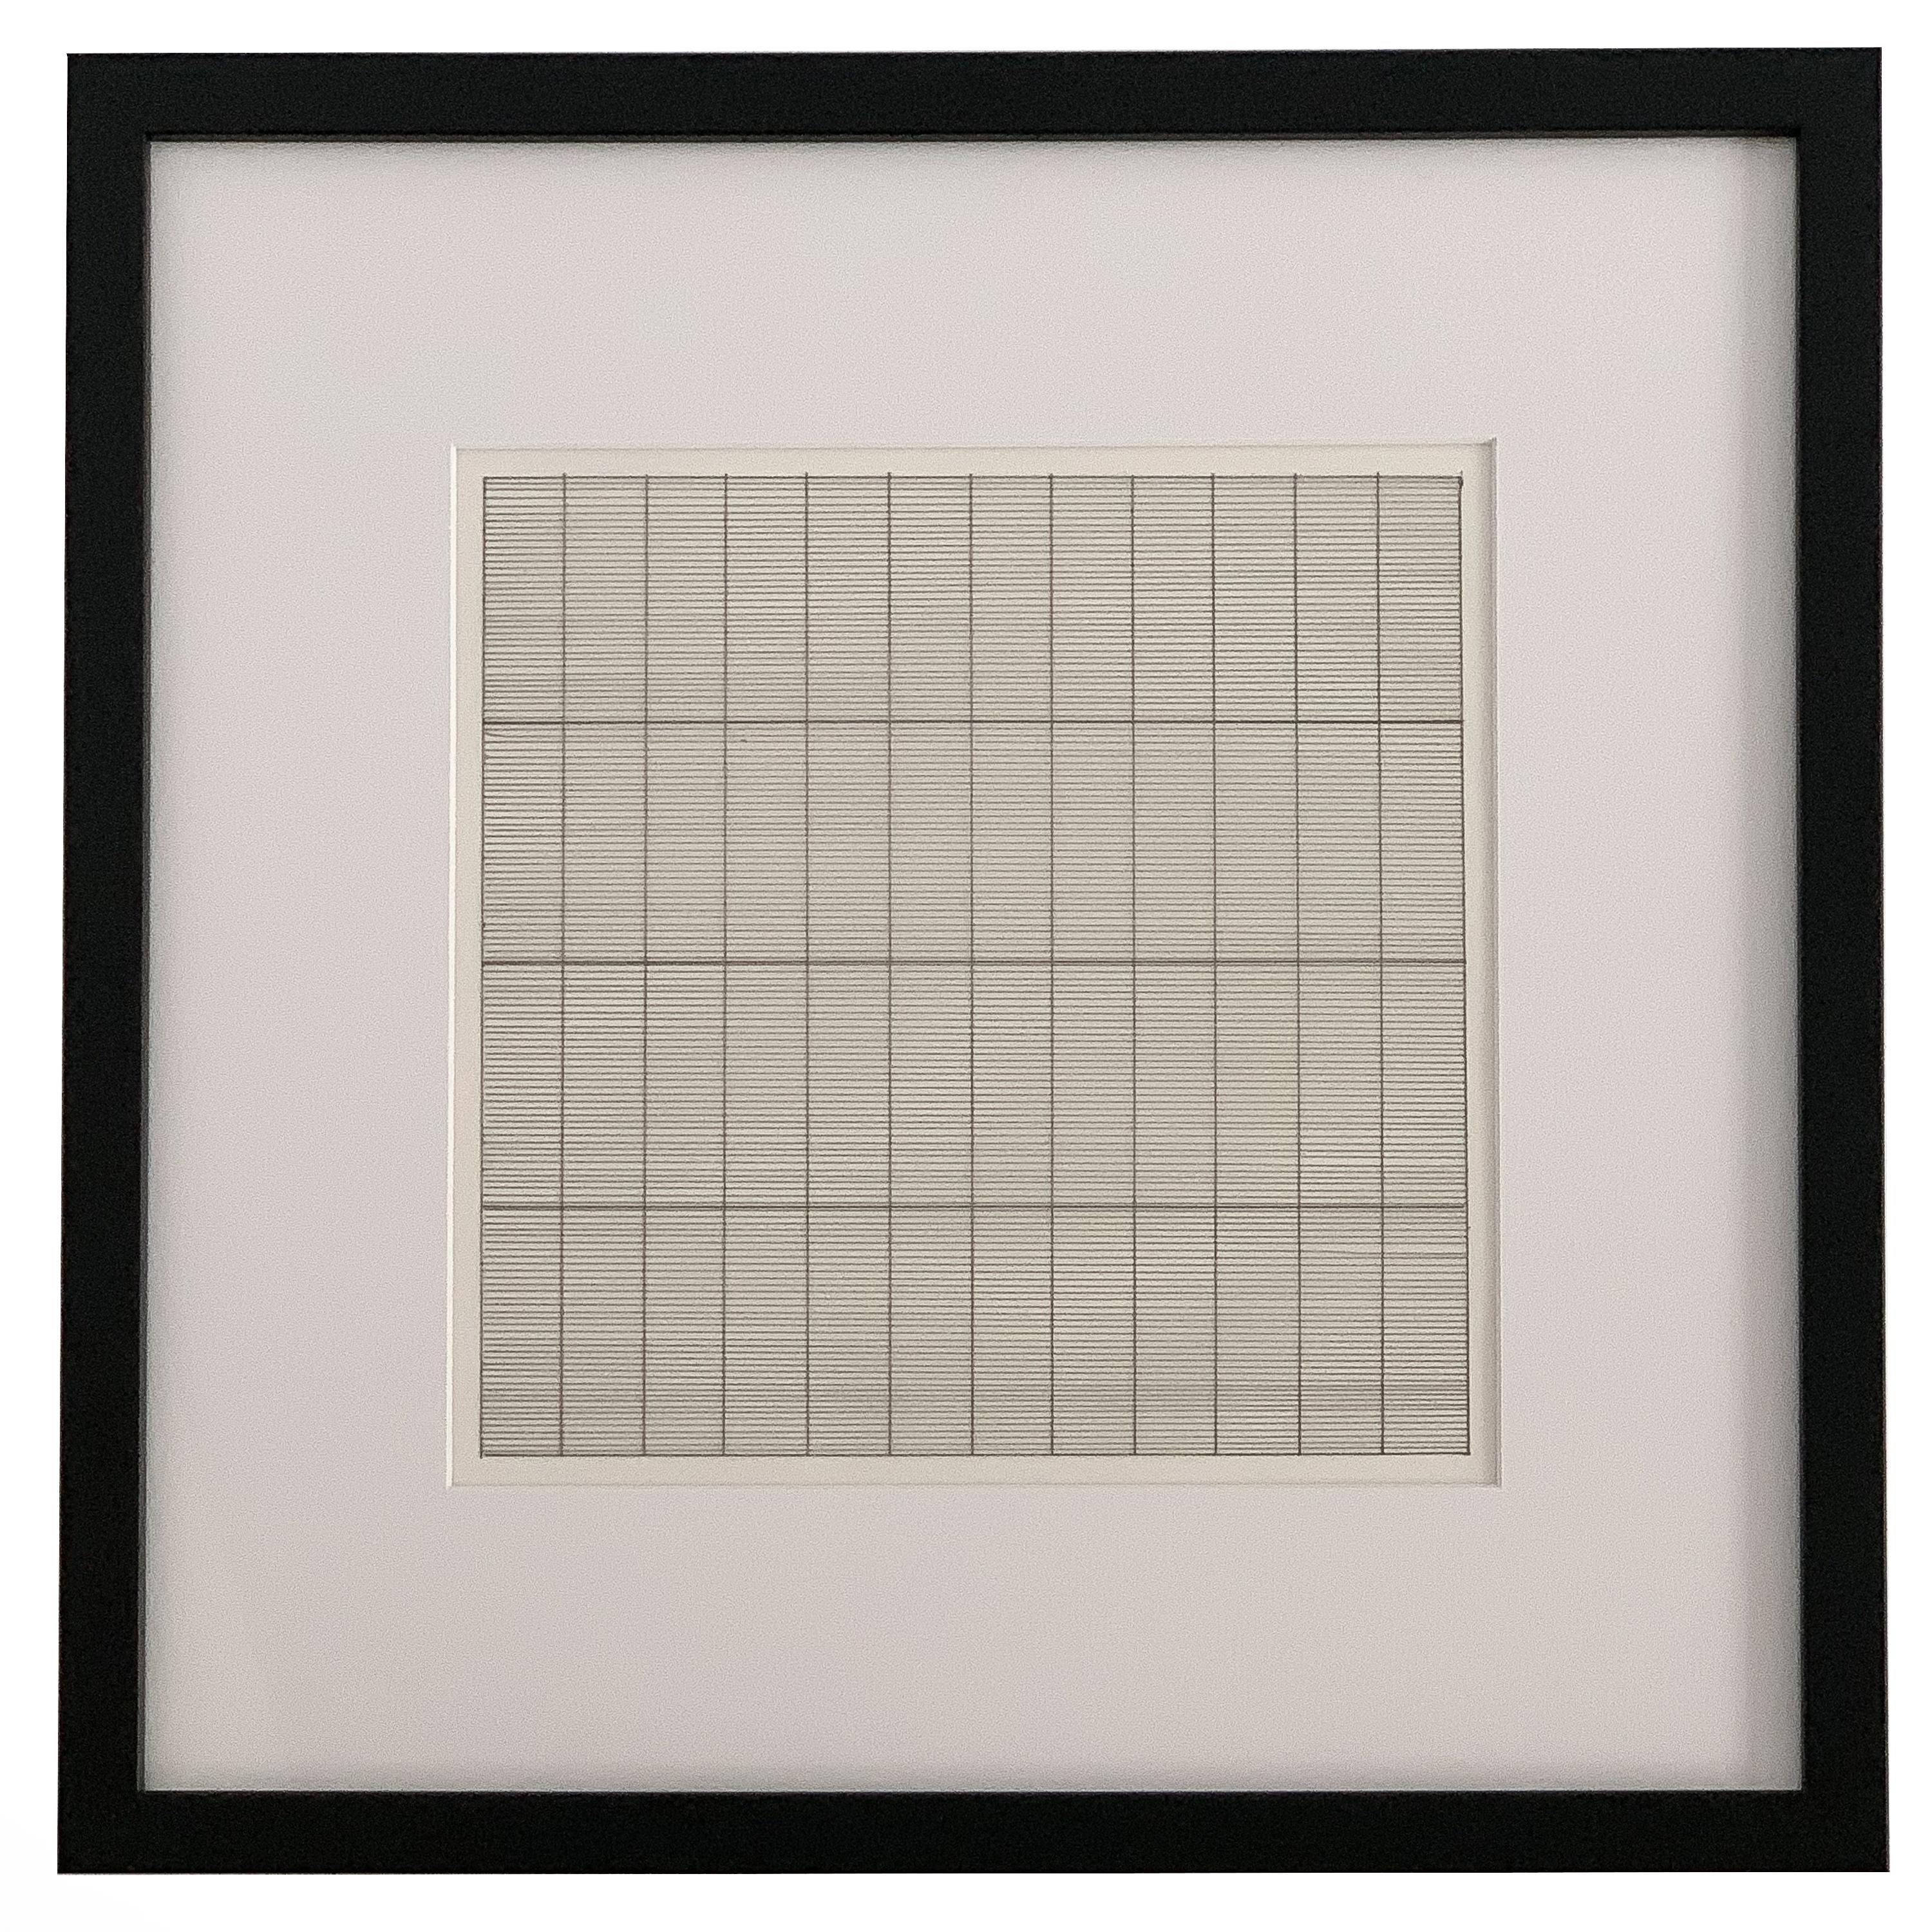 Complete portfolio of ten individually framed offset lithographs by American / Canadian artist Agnes Martin. Printed on vellum transparency paper, each lithograph is newly framed in a 3/4